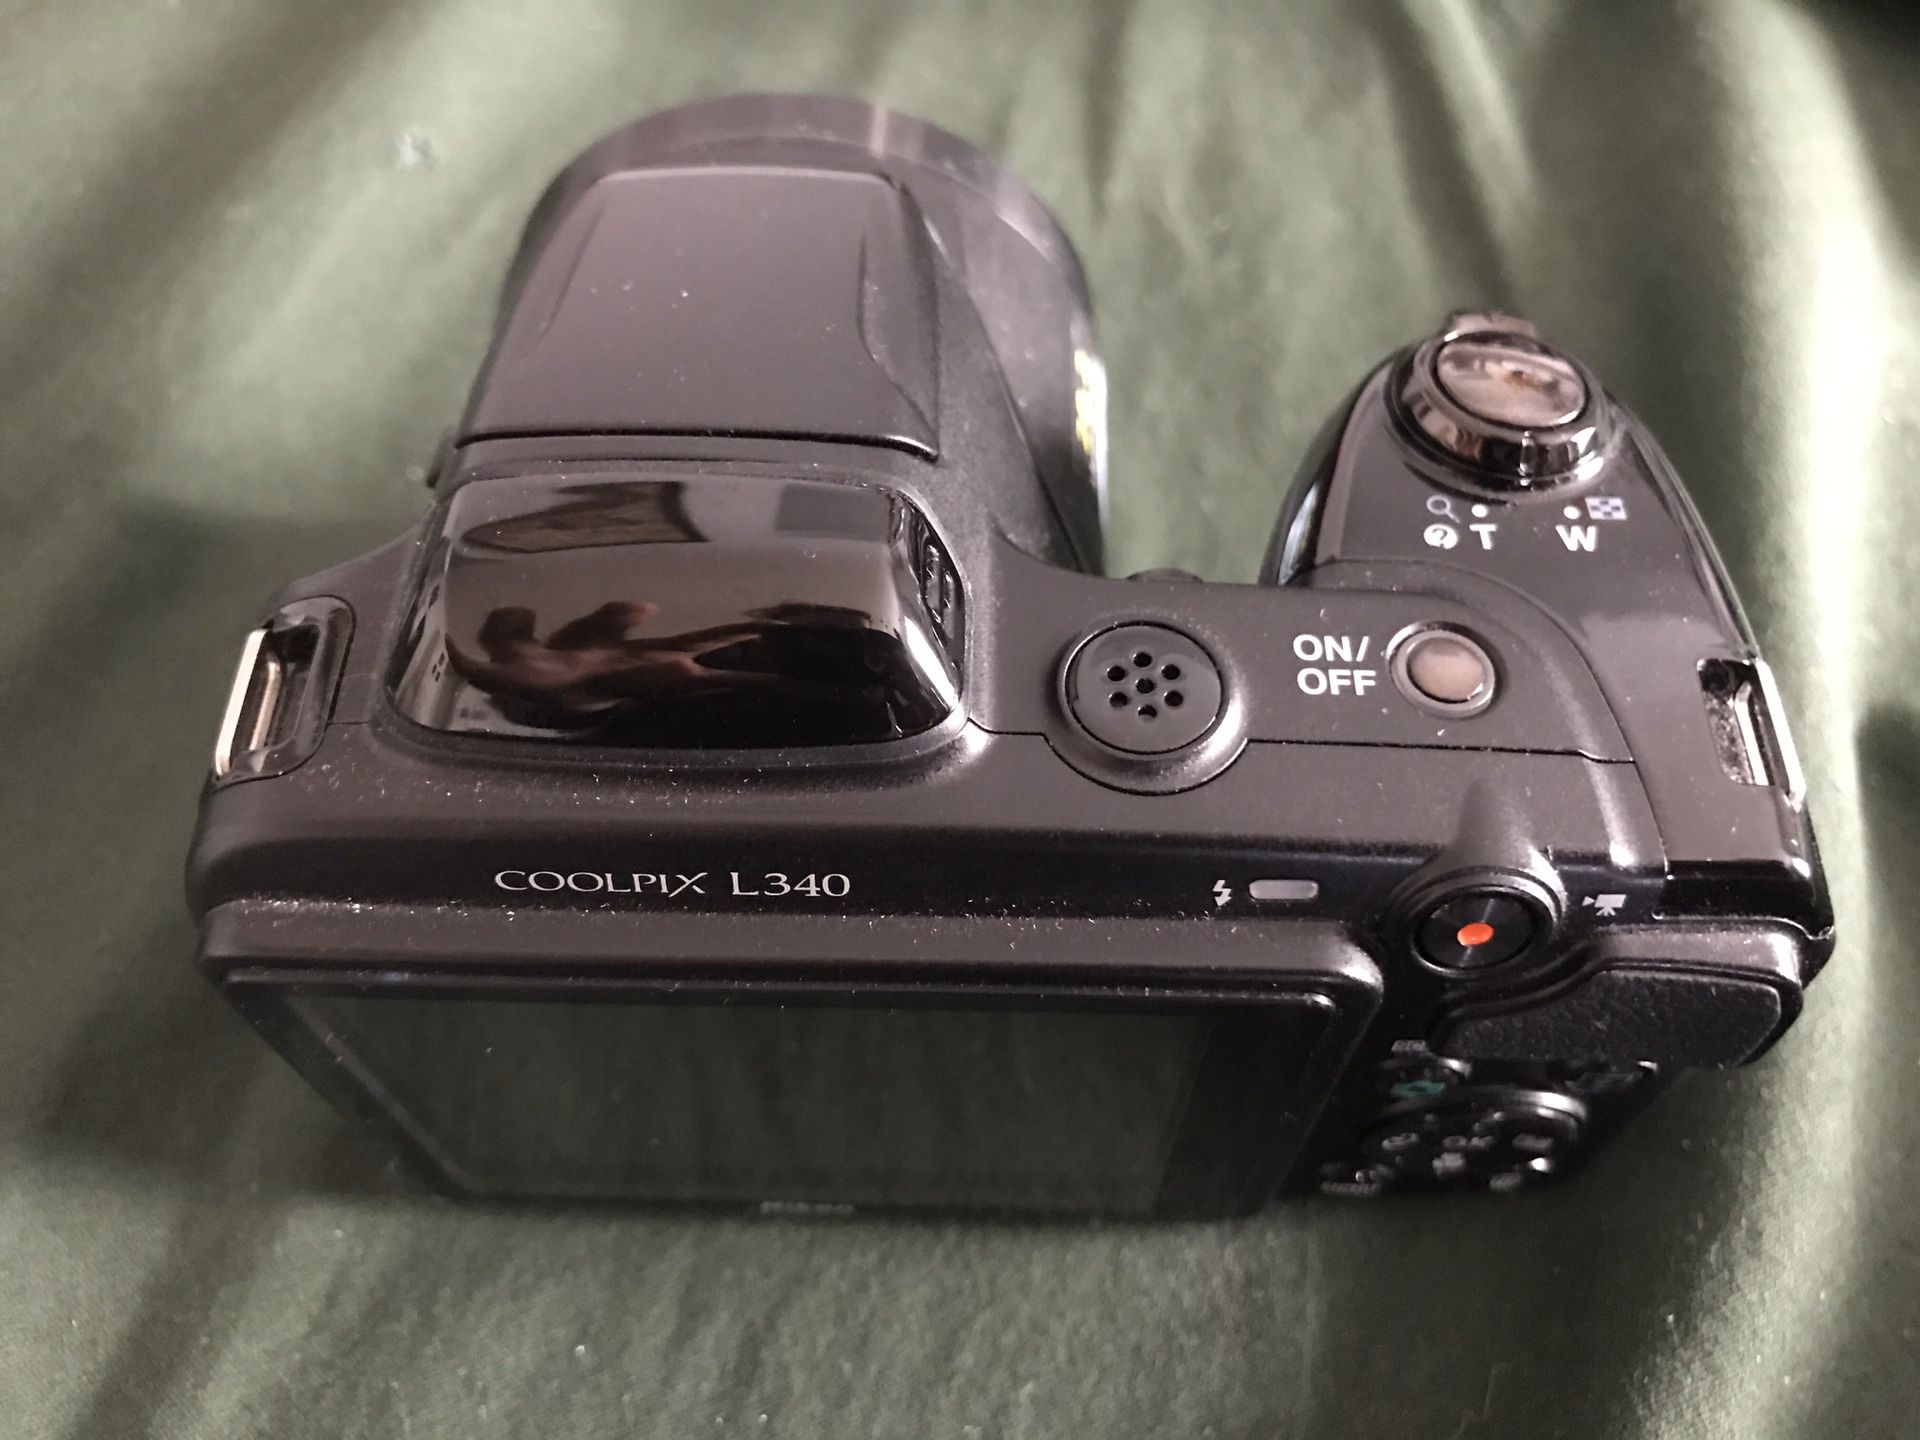 Nikon Coolpix L340 Digital Camera with Optical Zoom - This is in great condition, but does not include the accessories. Here are feature details: 28x